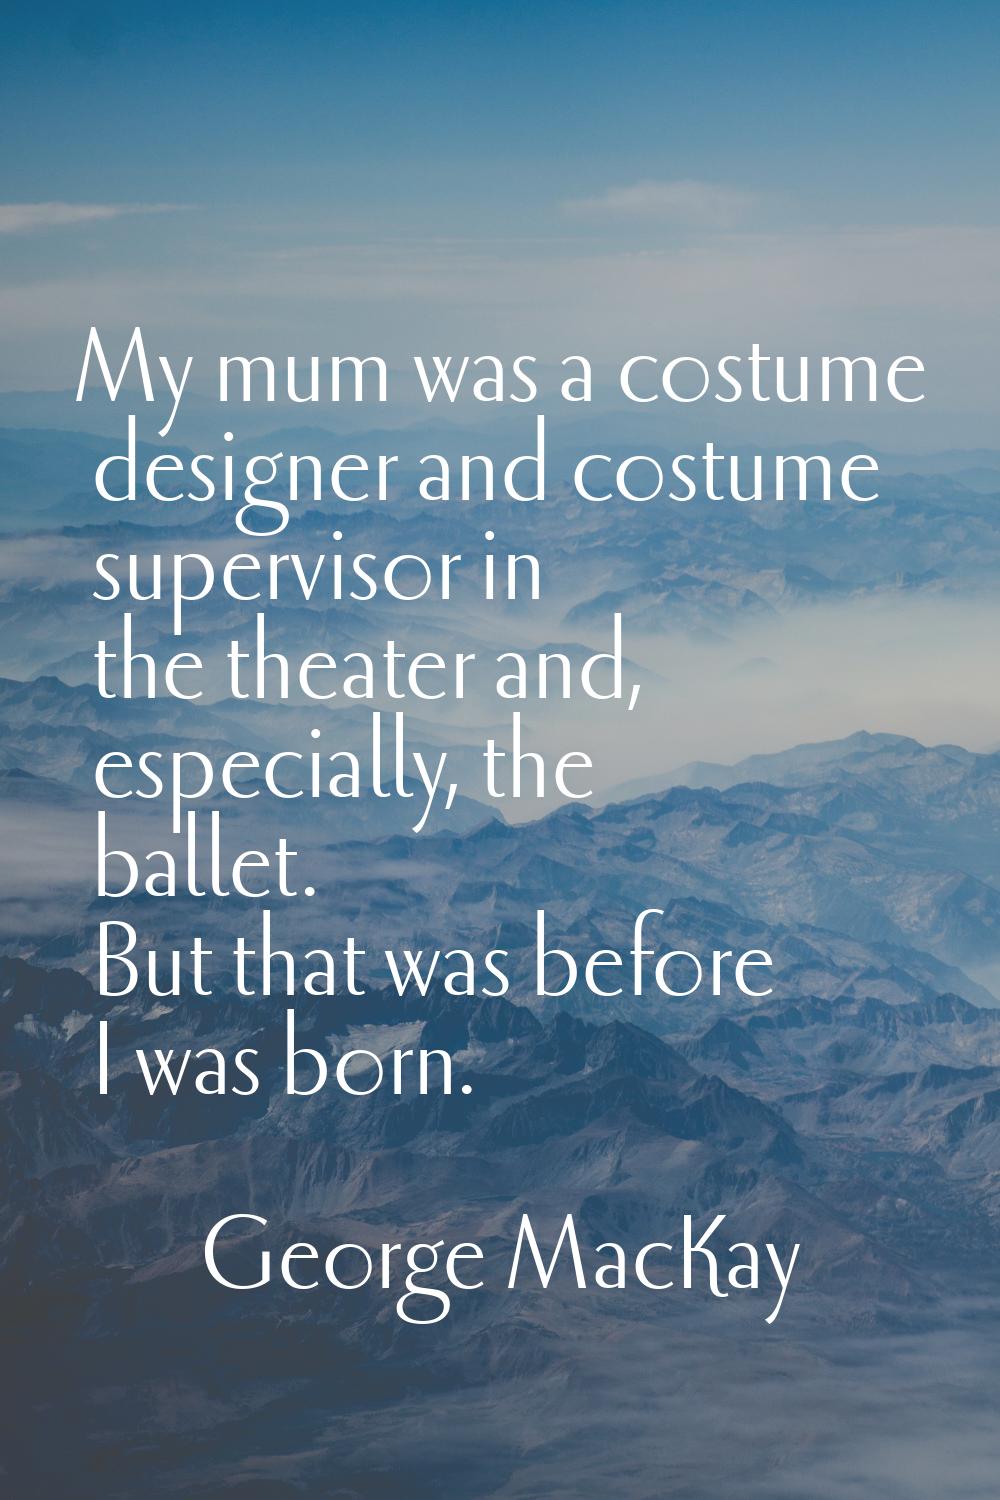 My mum was a costume designer and costume supervisor in the theater and, especially, the ballet. Bu